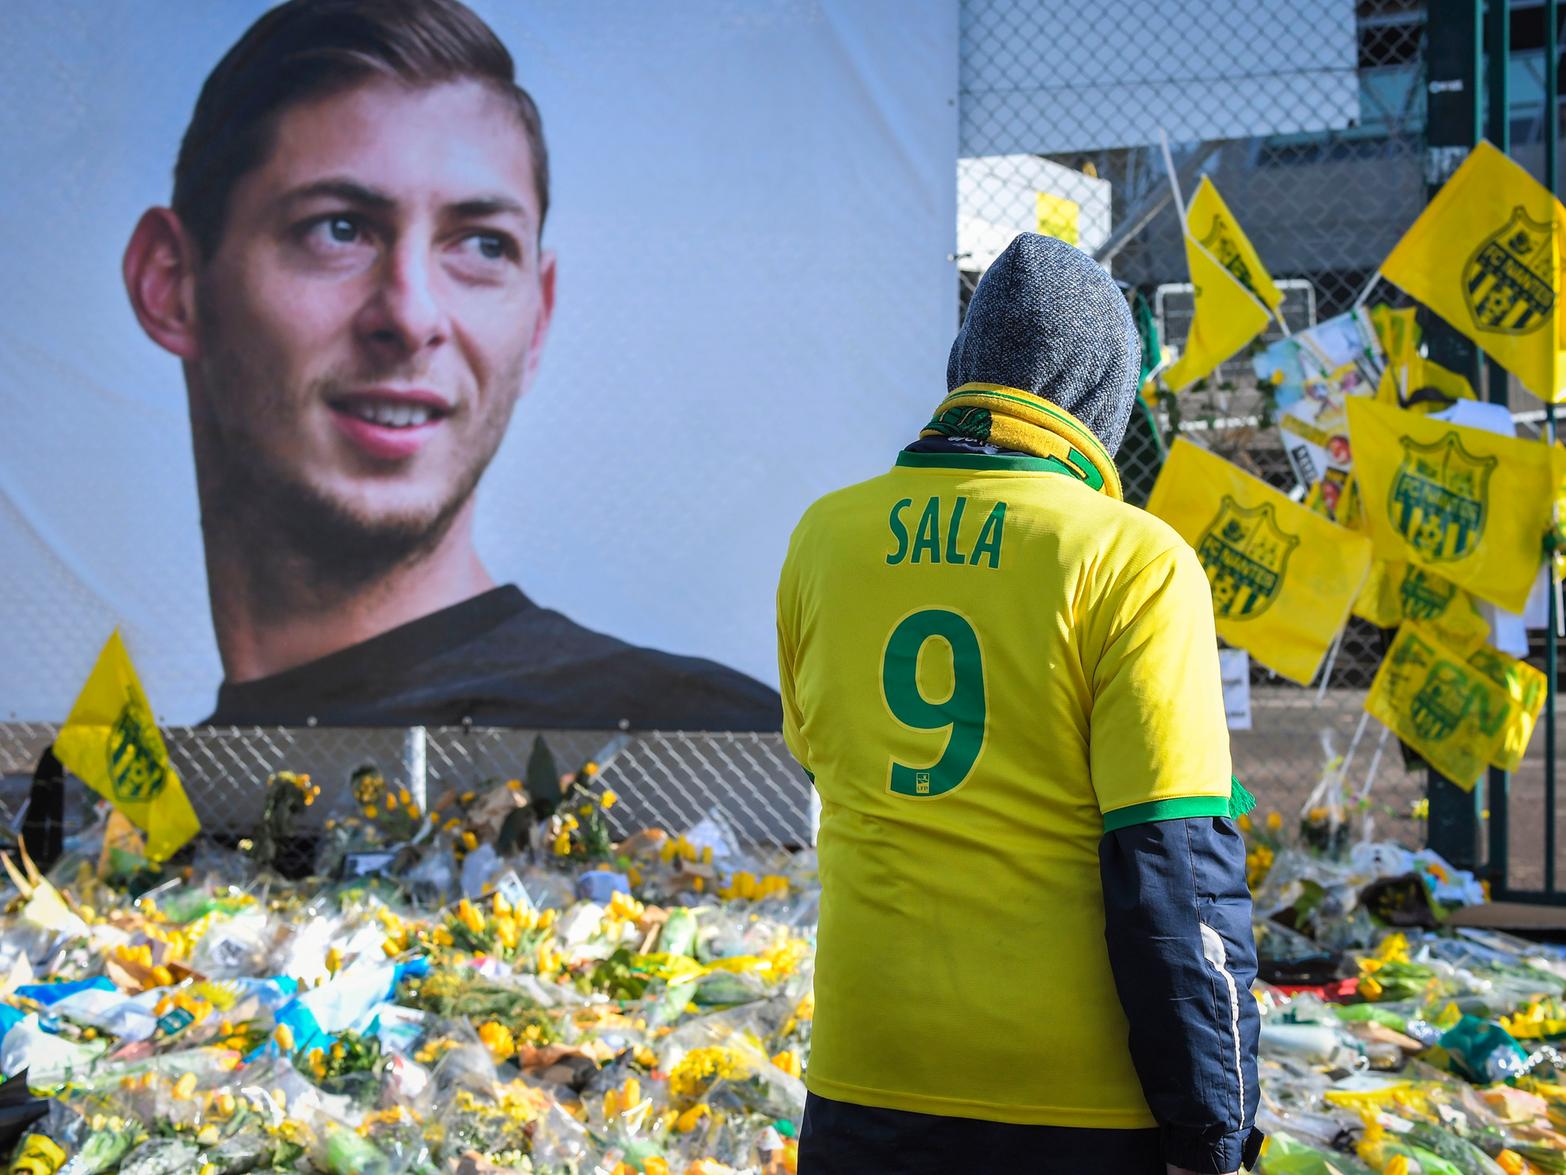 Cardiff City may be forced to pay Nantes the entire 15m transfer fee for Emiliano Sala, who tragically died in a plane crash last January. The two clubs remain locked in a legal dispute over the situation. (Daily Telegraph)